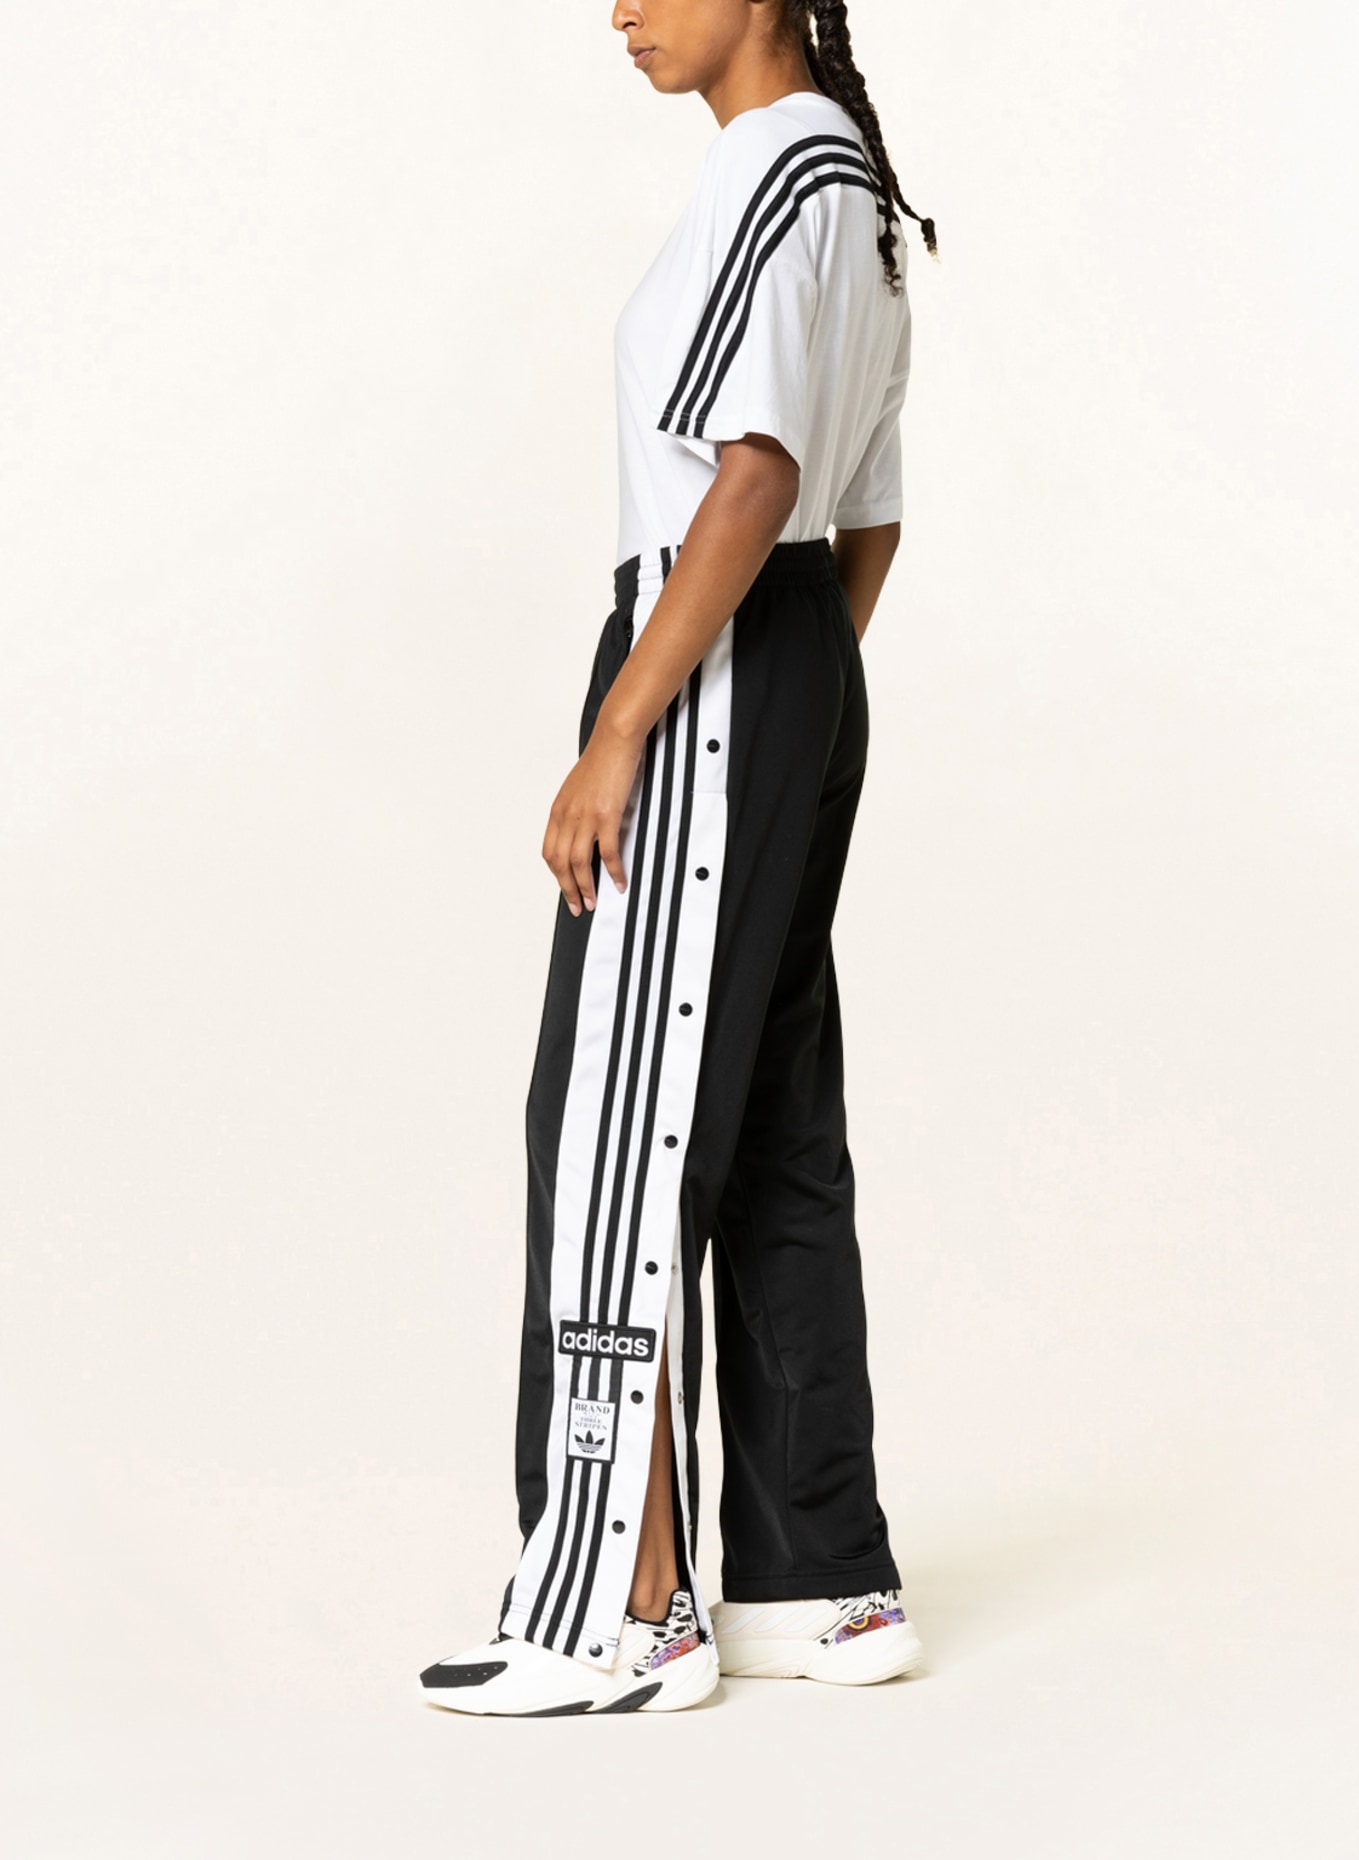 Adidas Originals Full Length Side Button Pants Black (S), Men's Fashion,  Bottoms, Trousers on Carousell